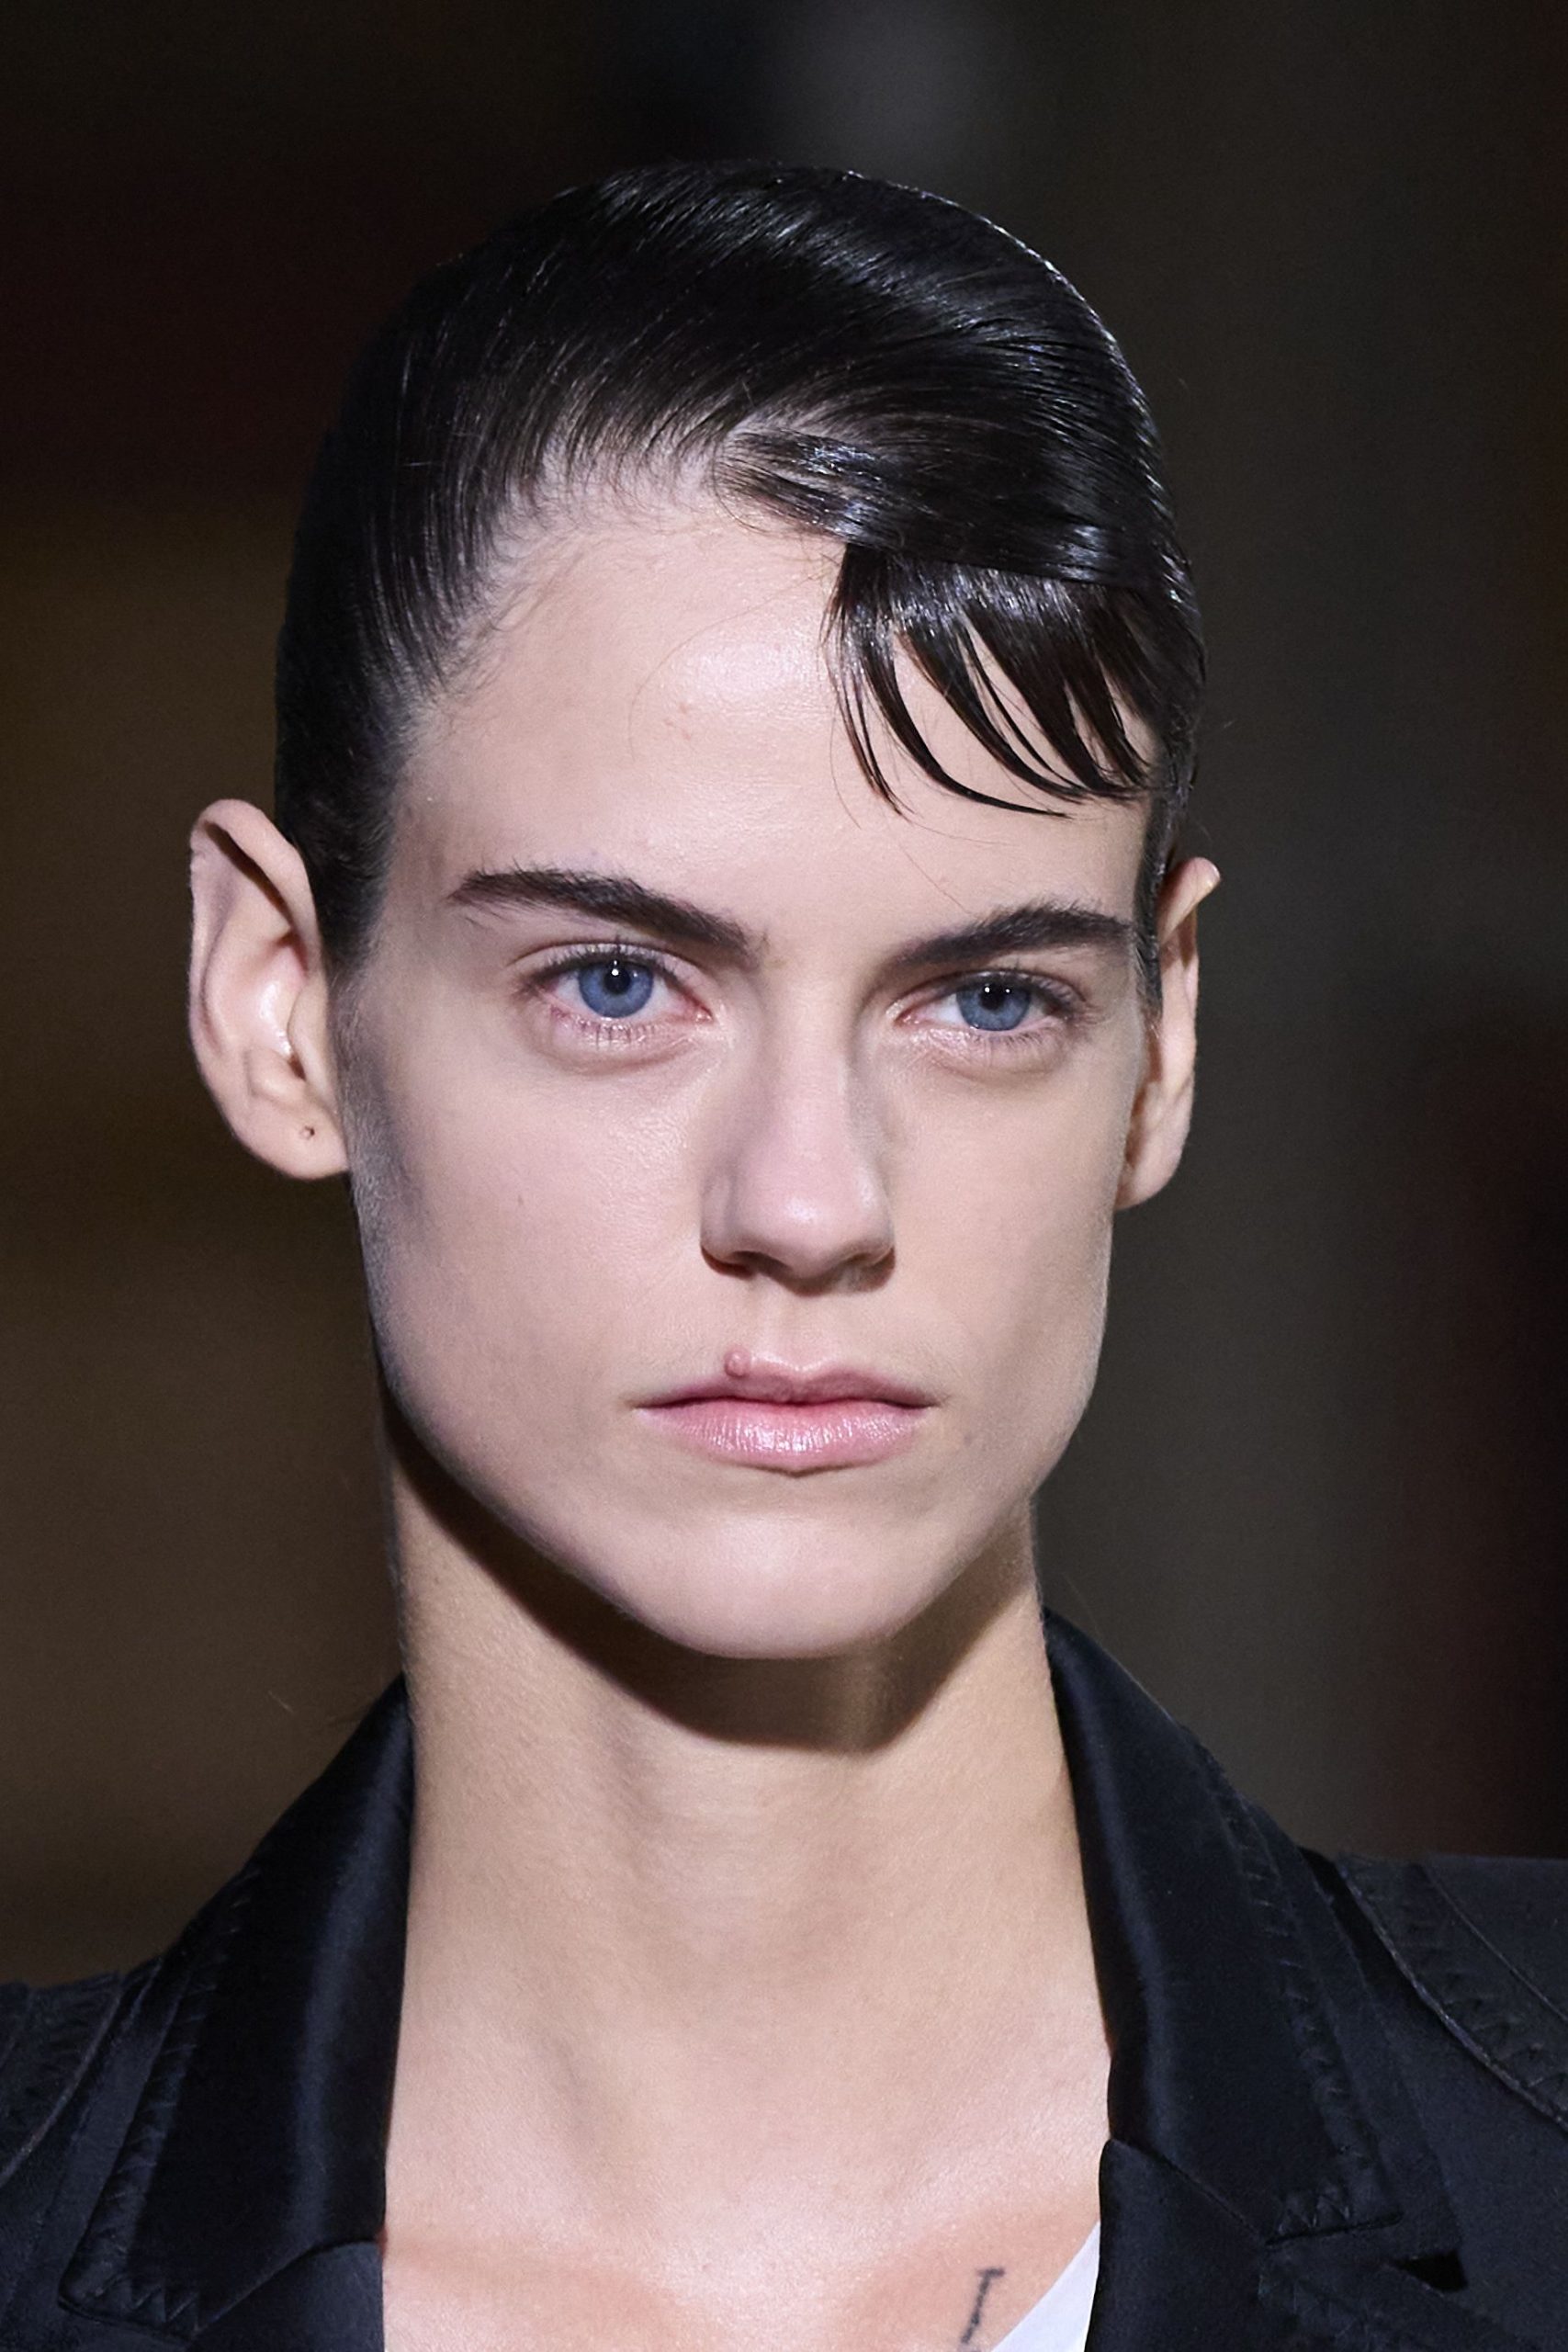 Sleek Rolled-up Pixie with Razored Bangs to the Side